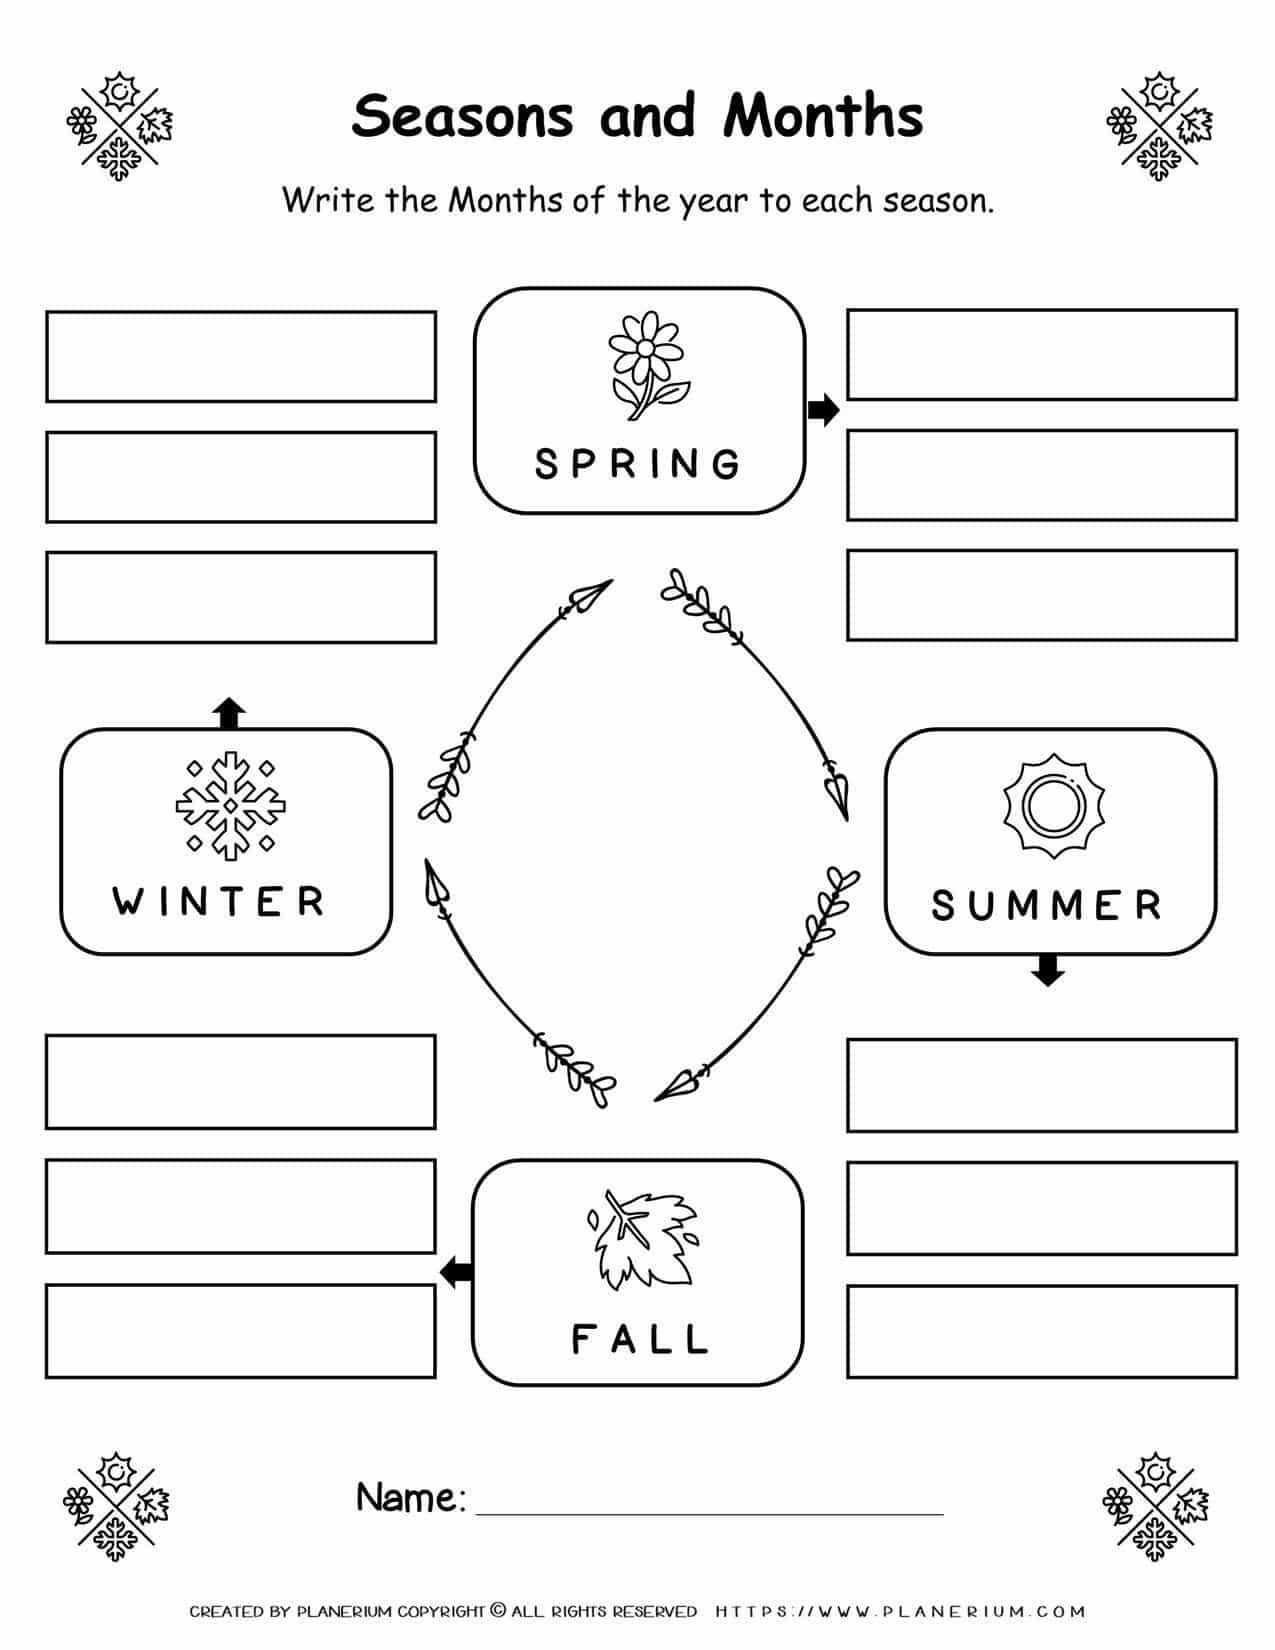 Four Seasons Of The Year And Their Months | Planerium